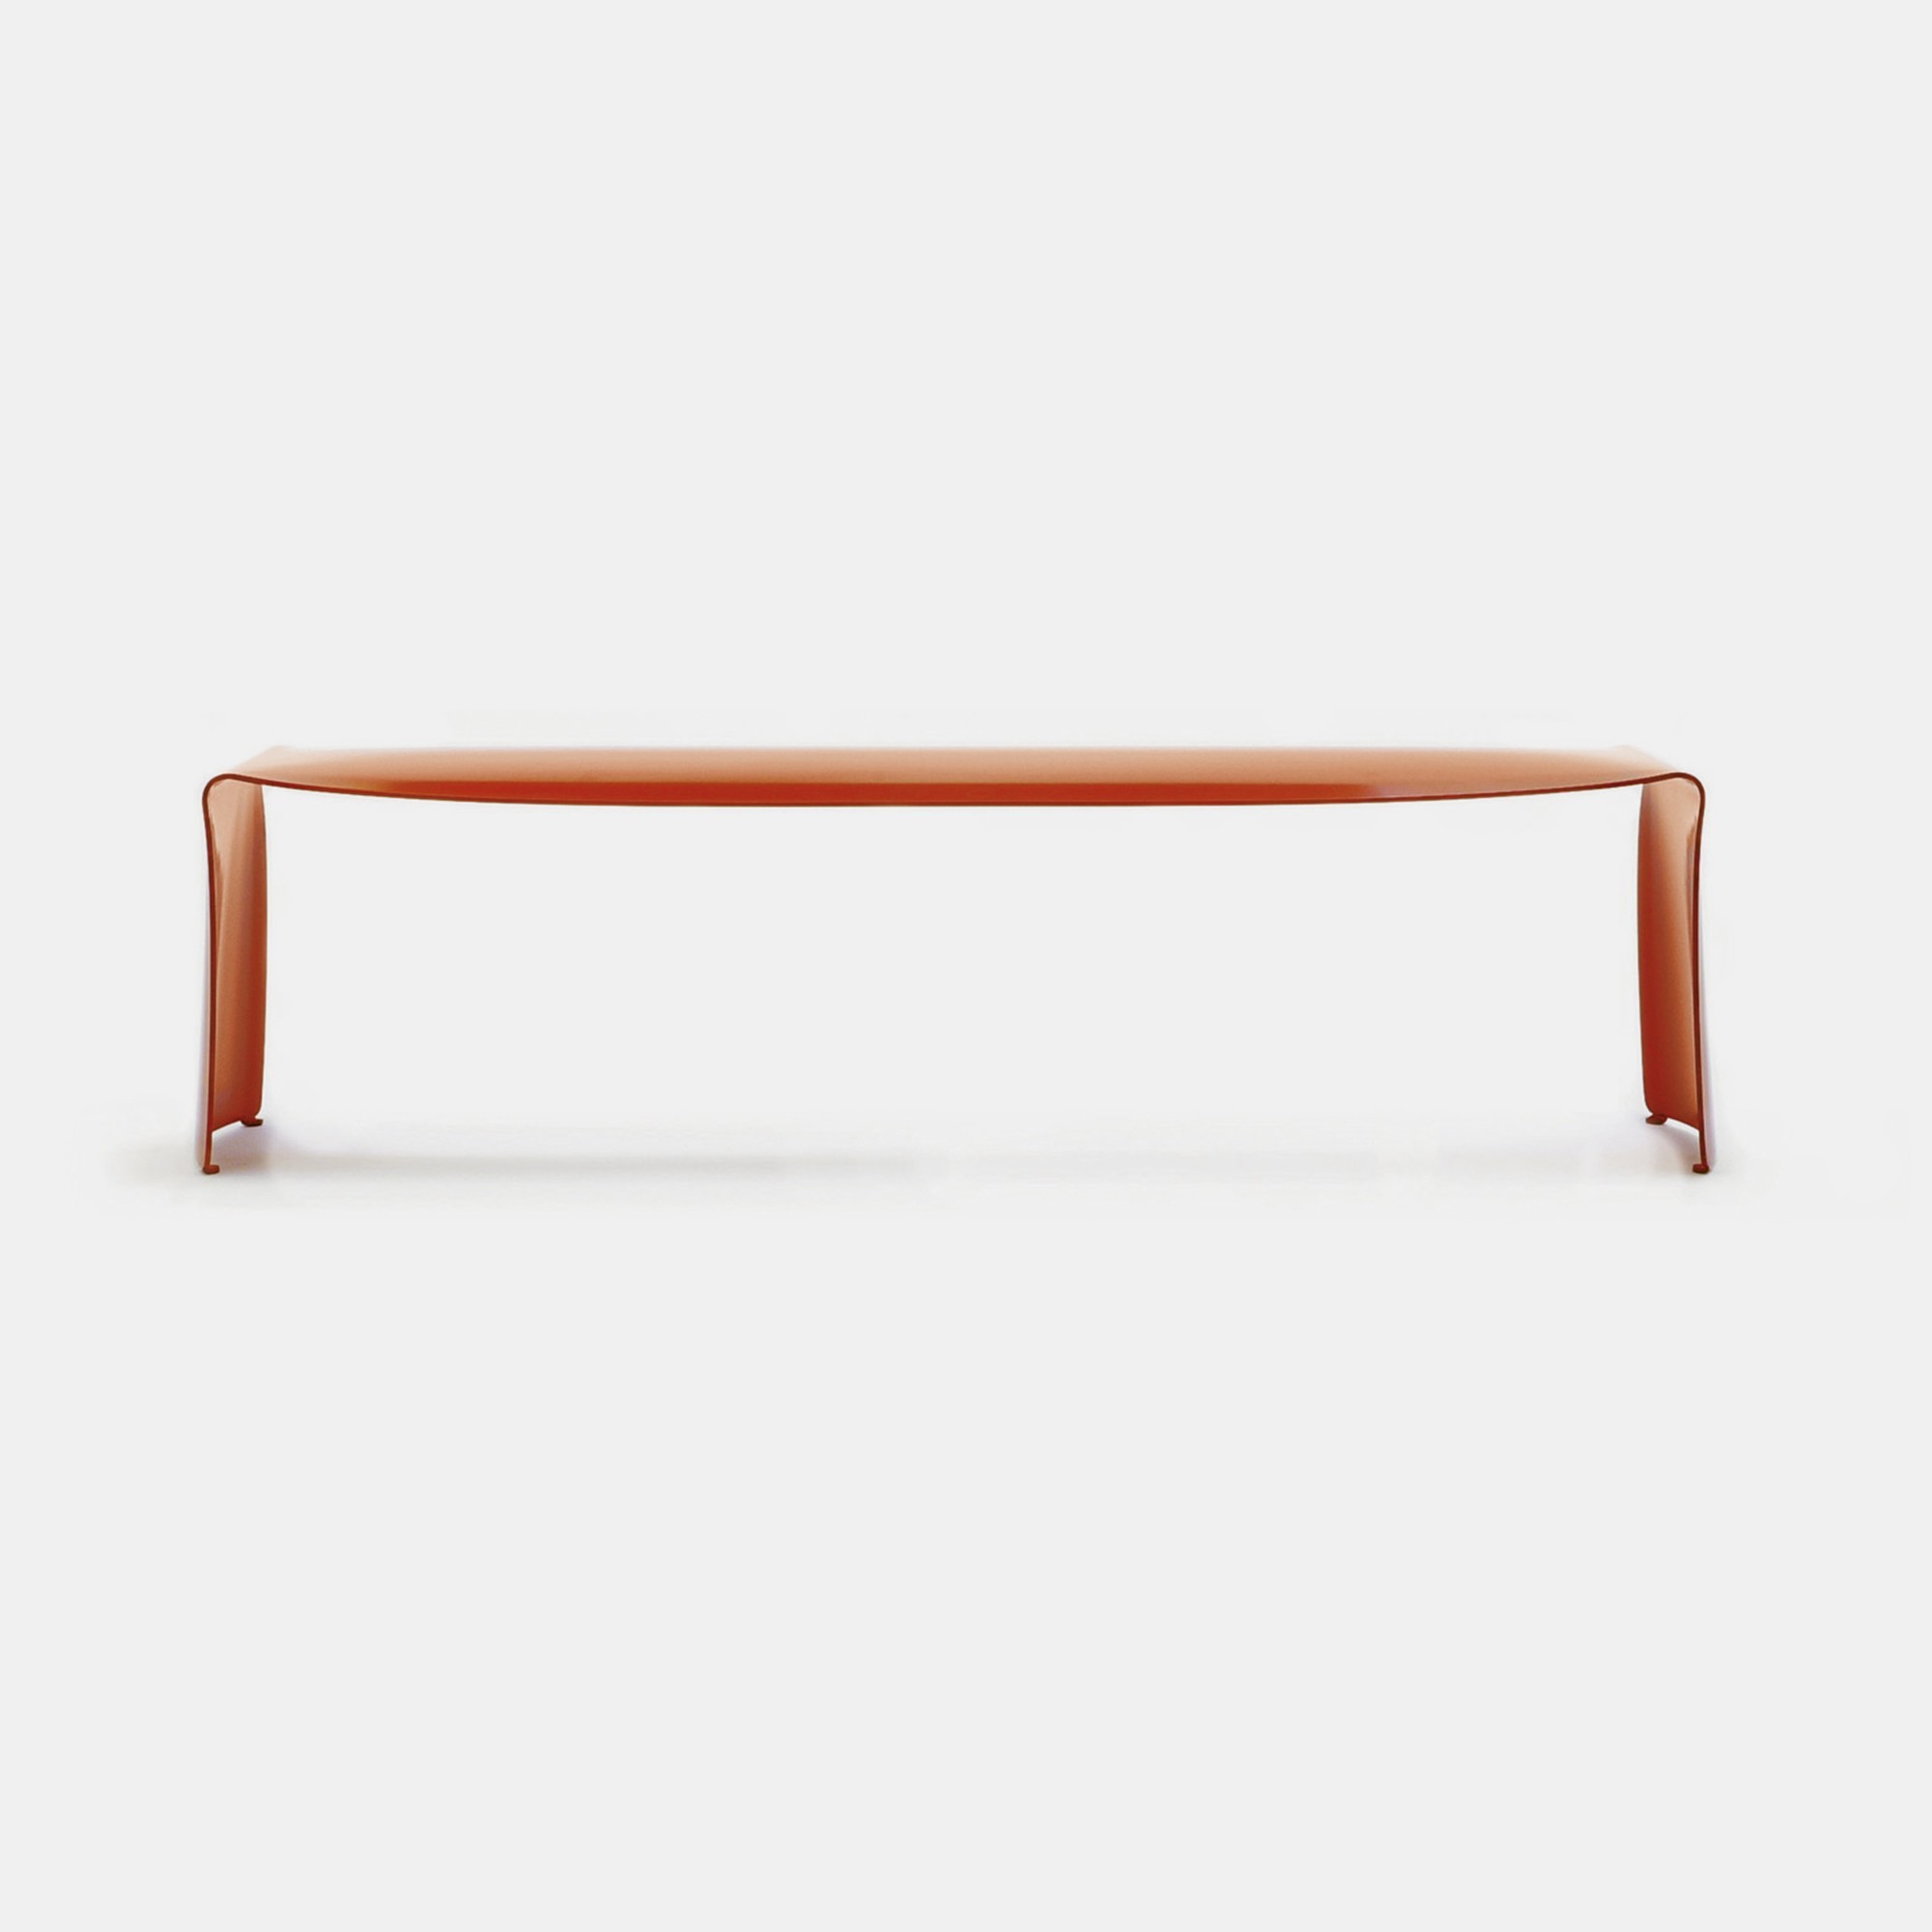 Le Banc Bench ☞ Color: Gloss Painted Red X063 ☞ Dimensions: Length 120 cm